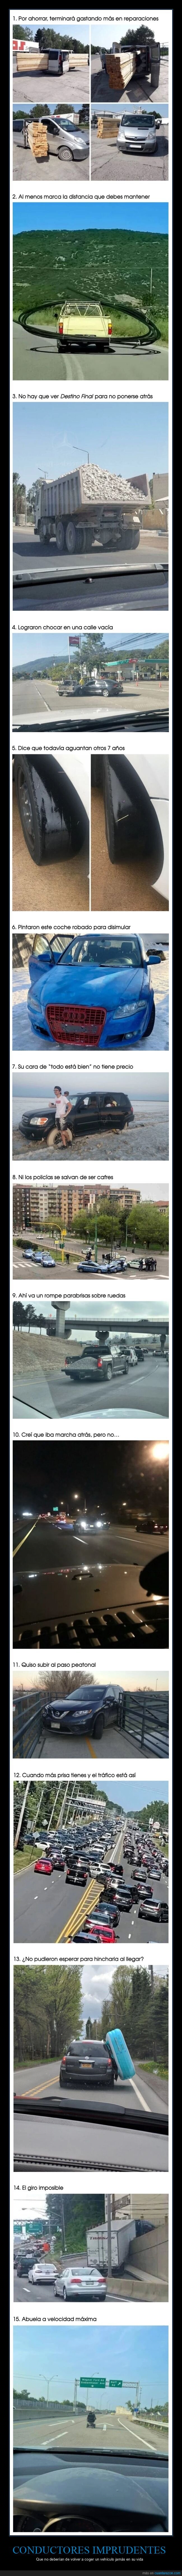 coches,conductores,fails